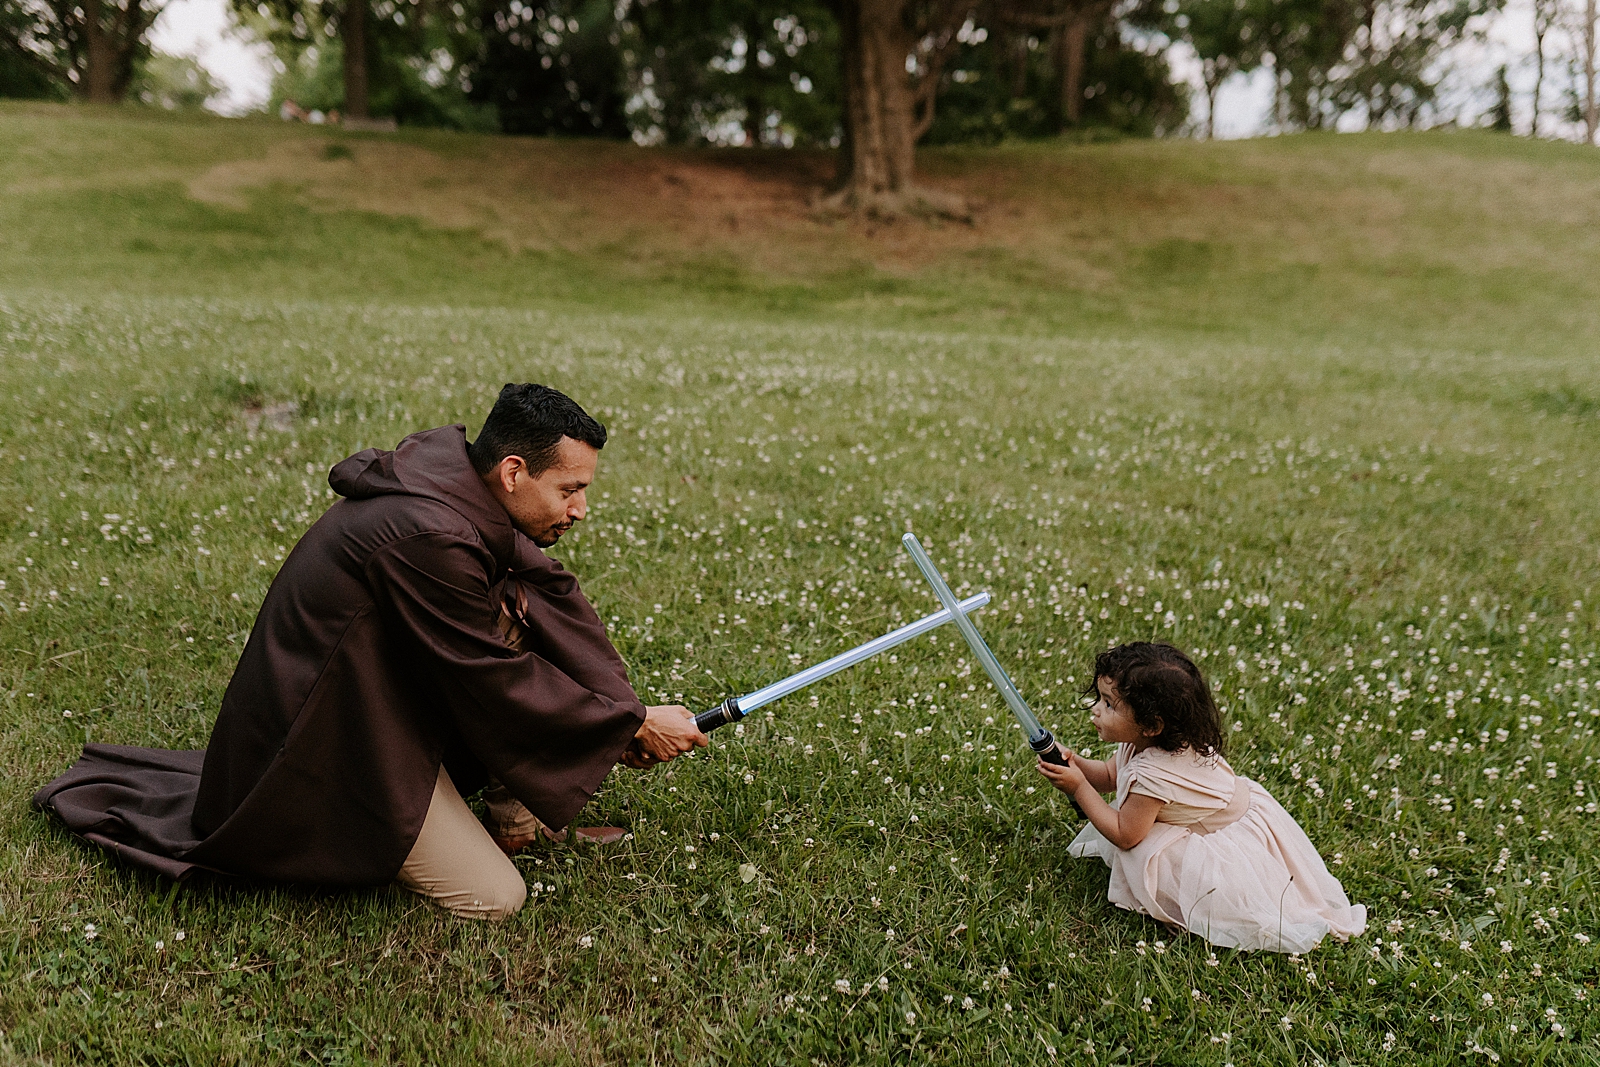 Father and daughter clashing lightsaber on grassy field